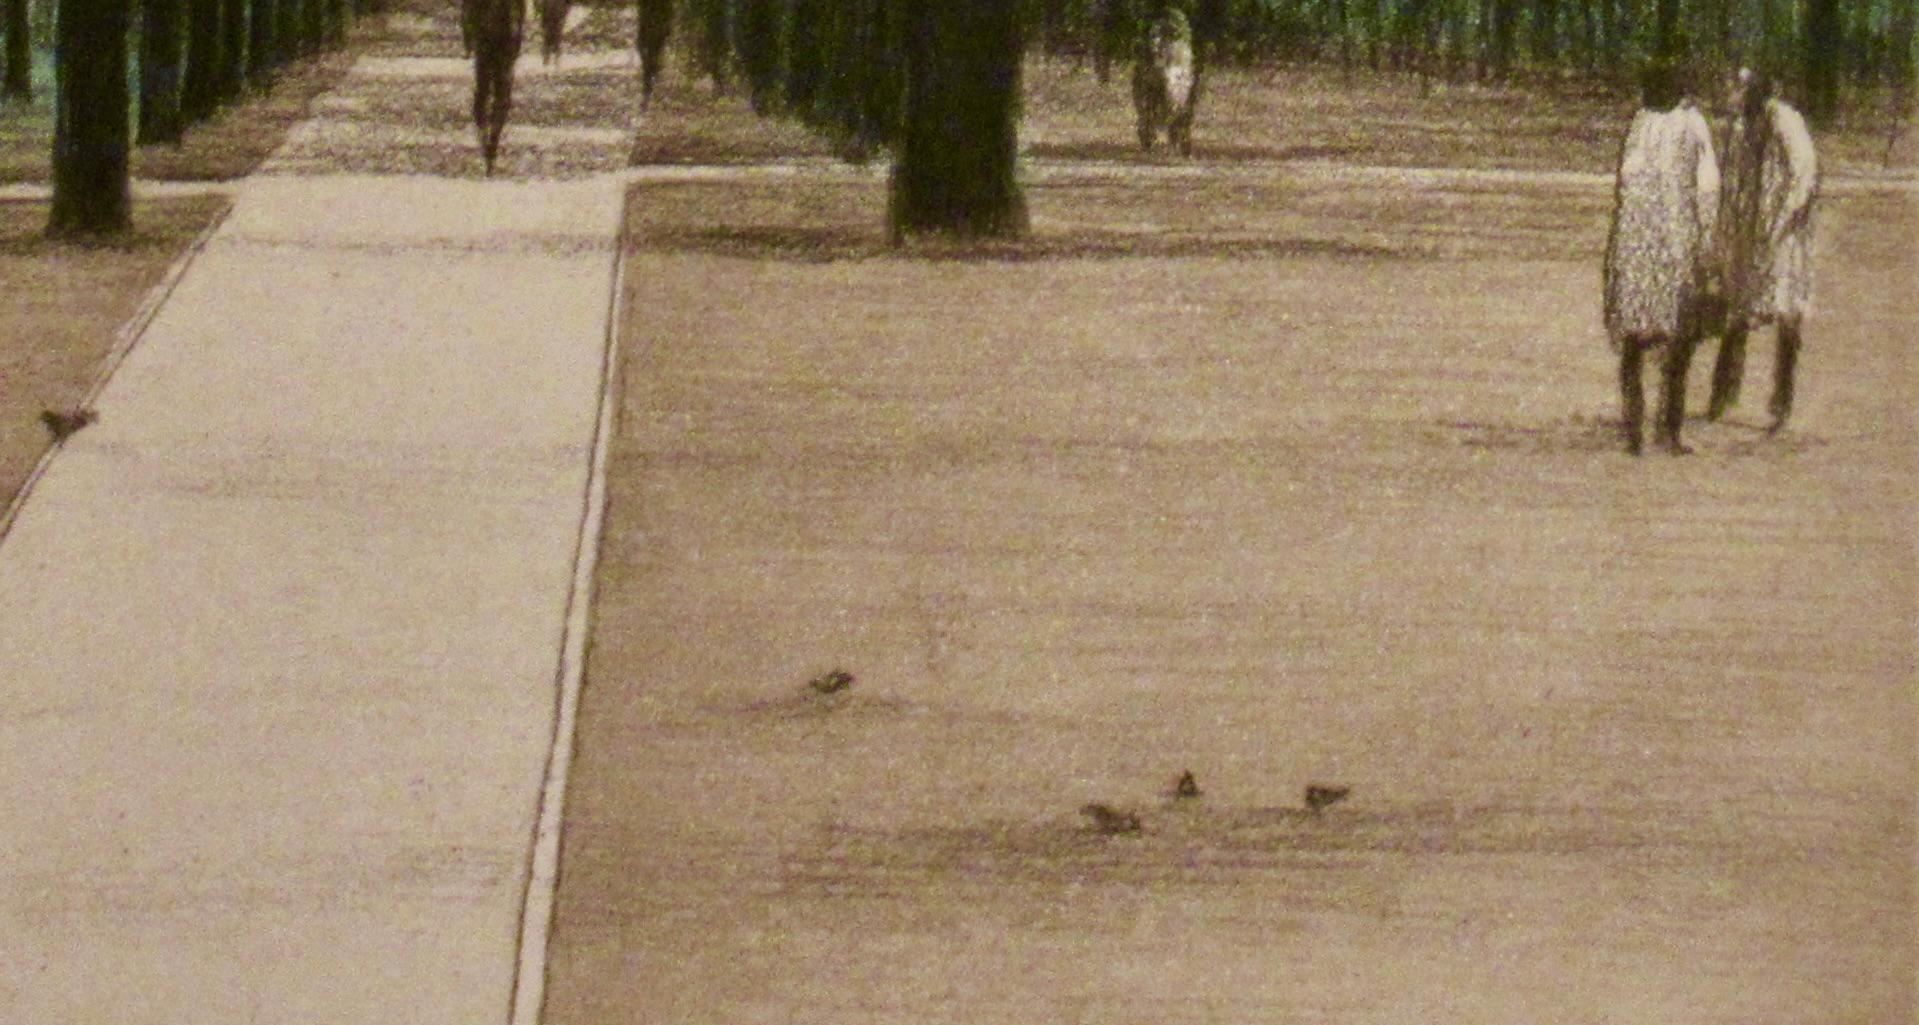 Artist:   Harold Altman (American, 1924-2003)
Title:  Five Pigeons (Jardin du Luxembourg, Paris)
Year:  1981
Medium:	Original color etching with aquatint
Edition: Numbered 75/200 in pencil
Paper:  Arches
Image (plate mark) size:  11.75 x 8.25